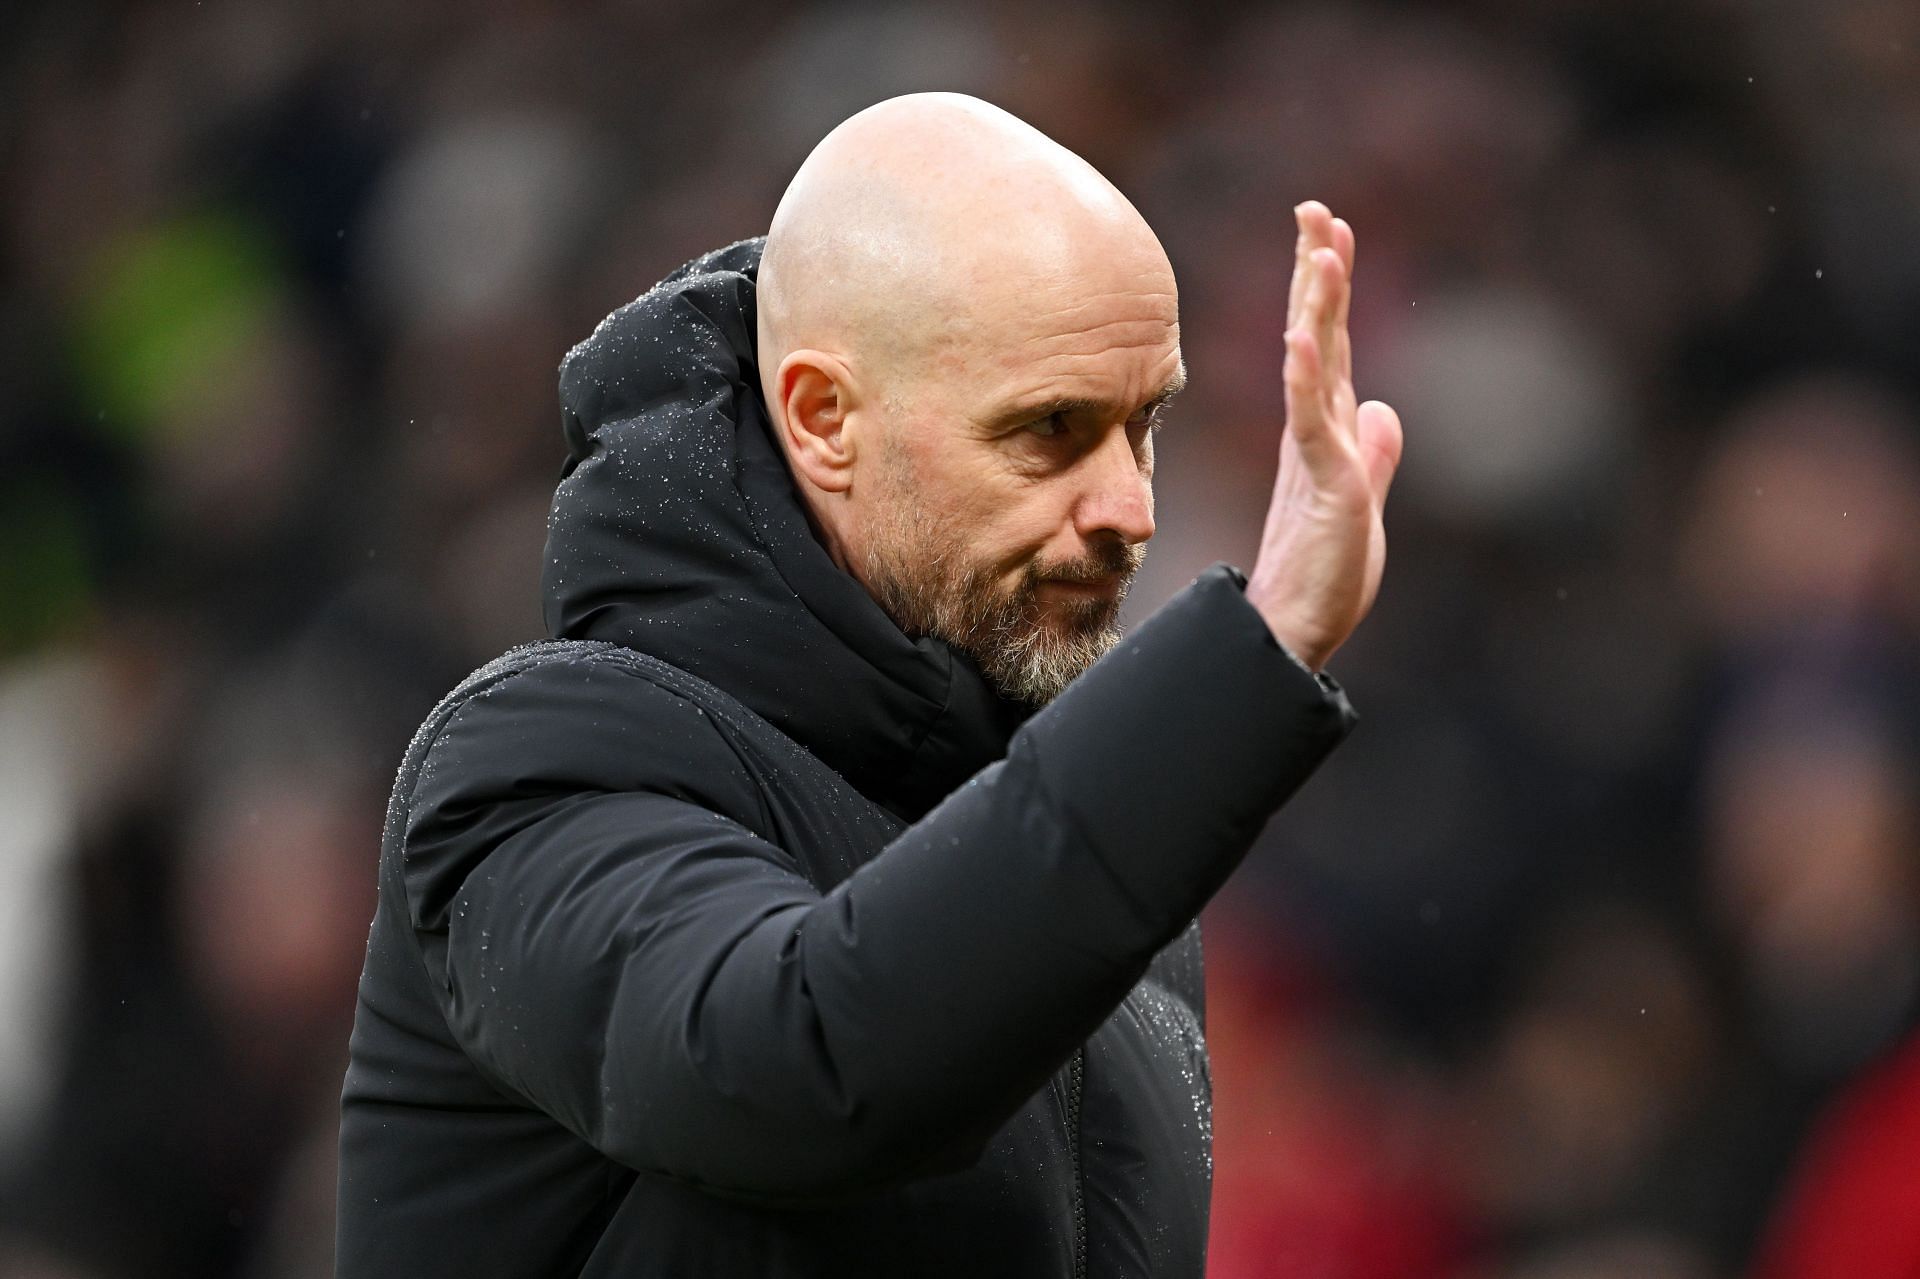 ten Hag hit back at the former Liverpool man.